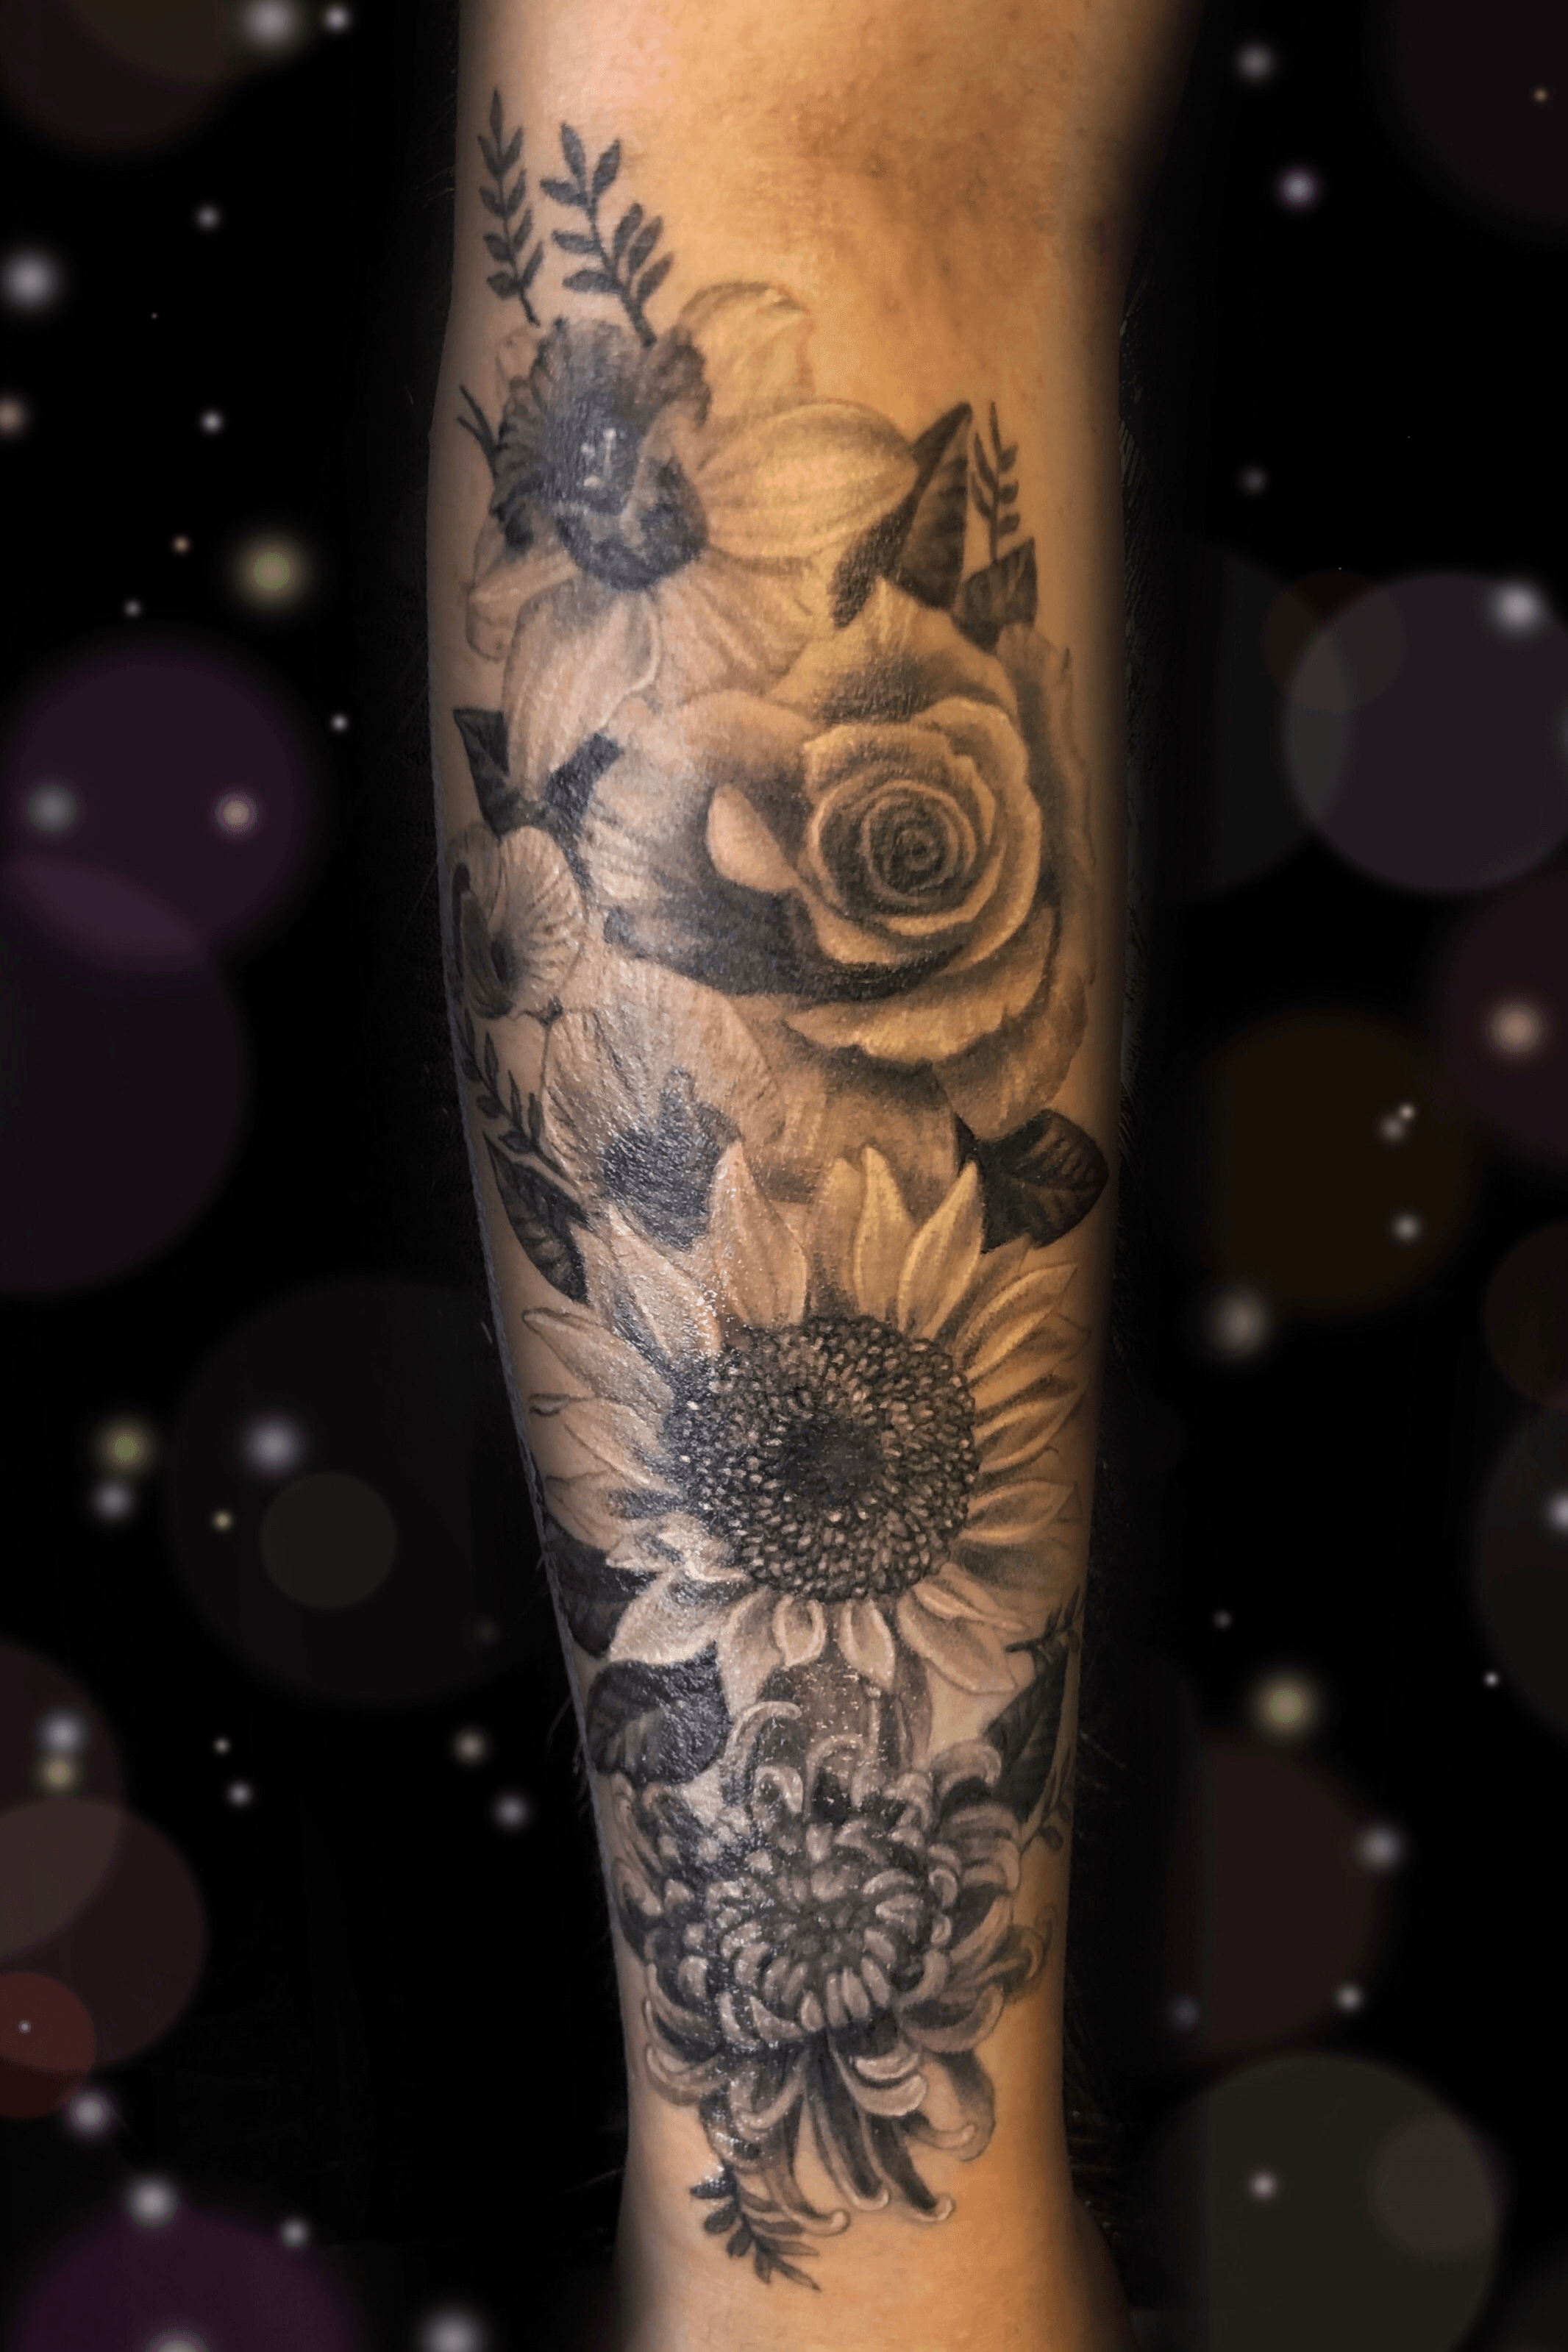 Black Flowers Tattoo  Black flowers tattoo Black and white flower tattoo  Floral arm tattoo